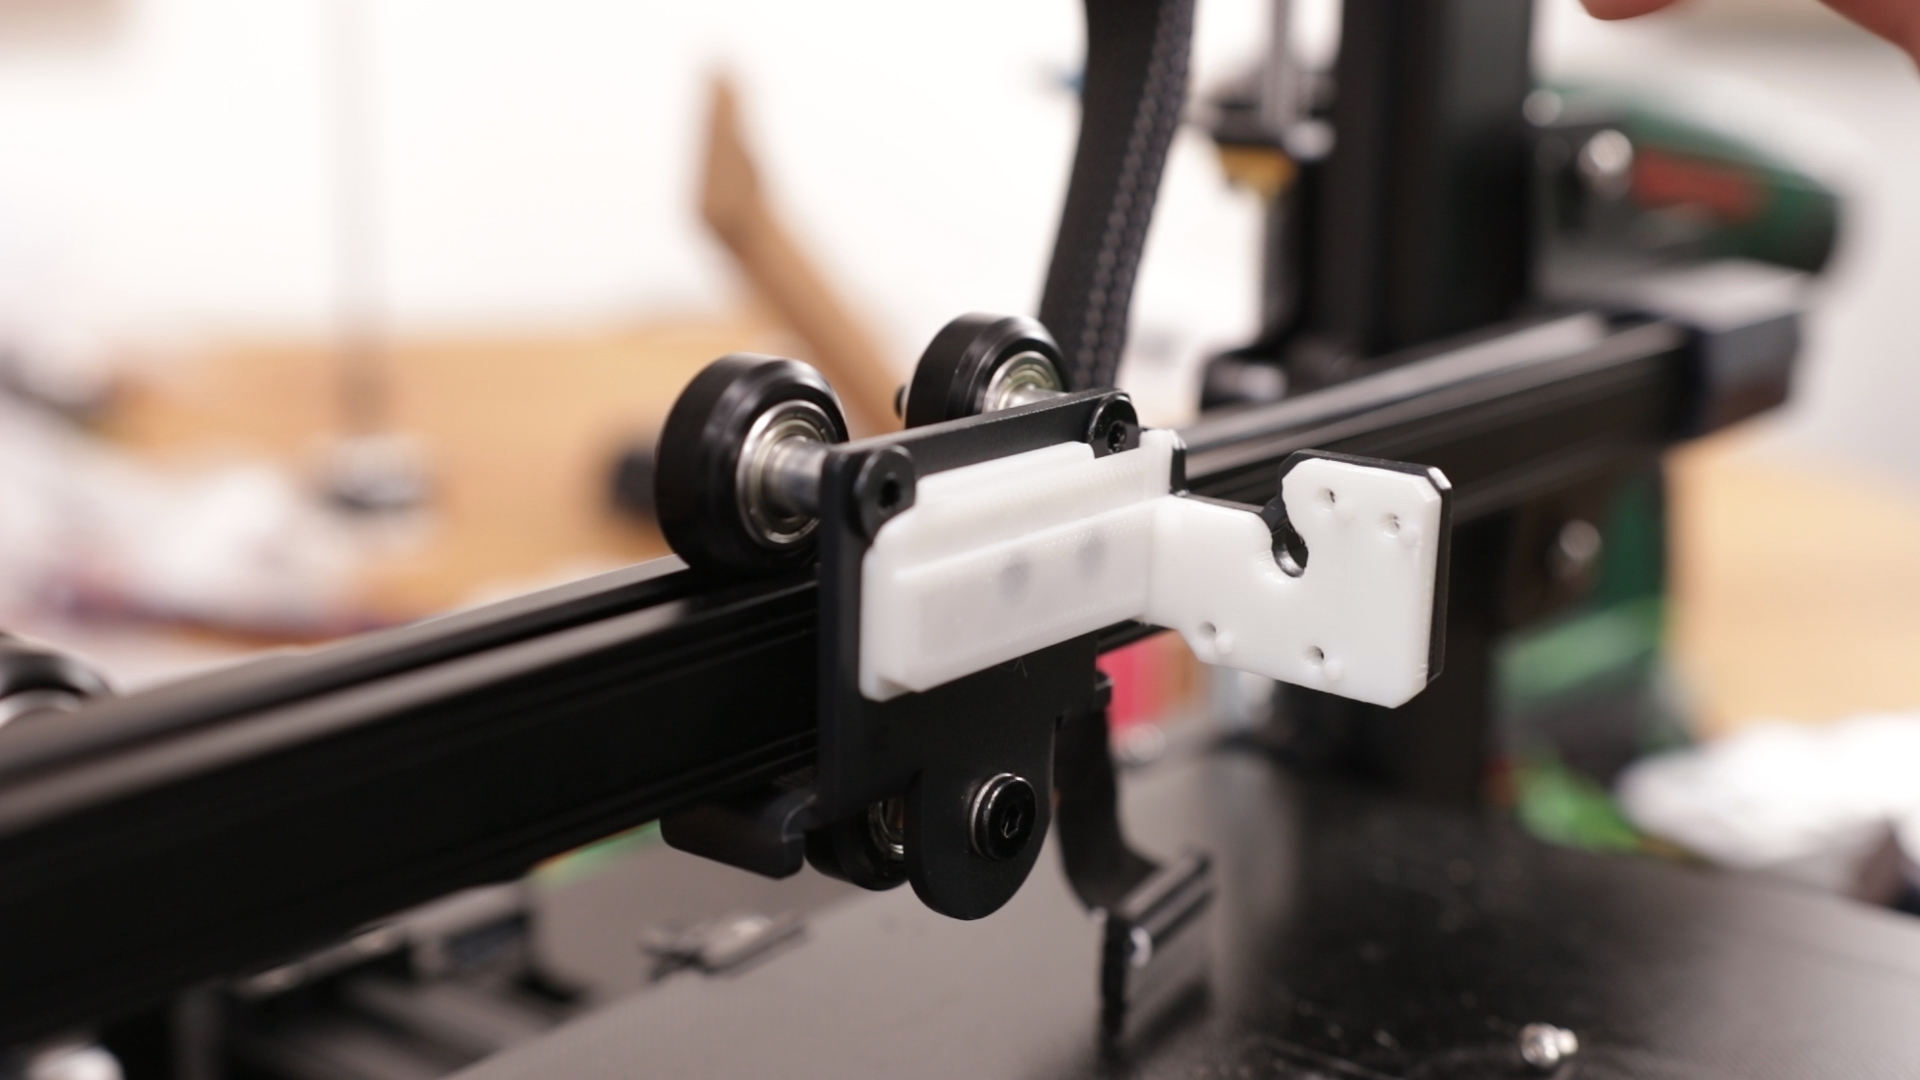 Modular 3-Point Y Carriage for Ender 3 S1 and S1 Pro